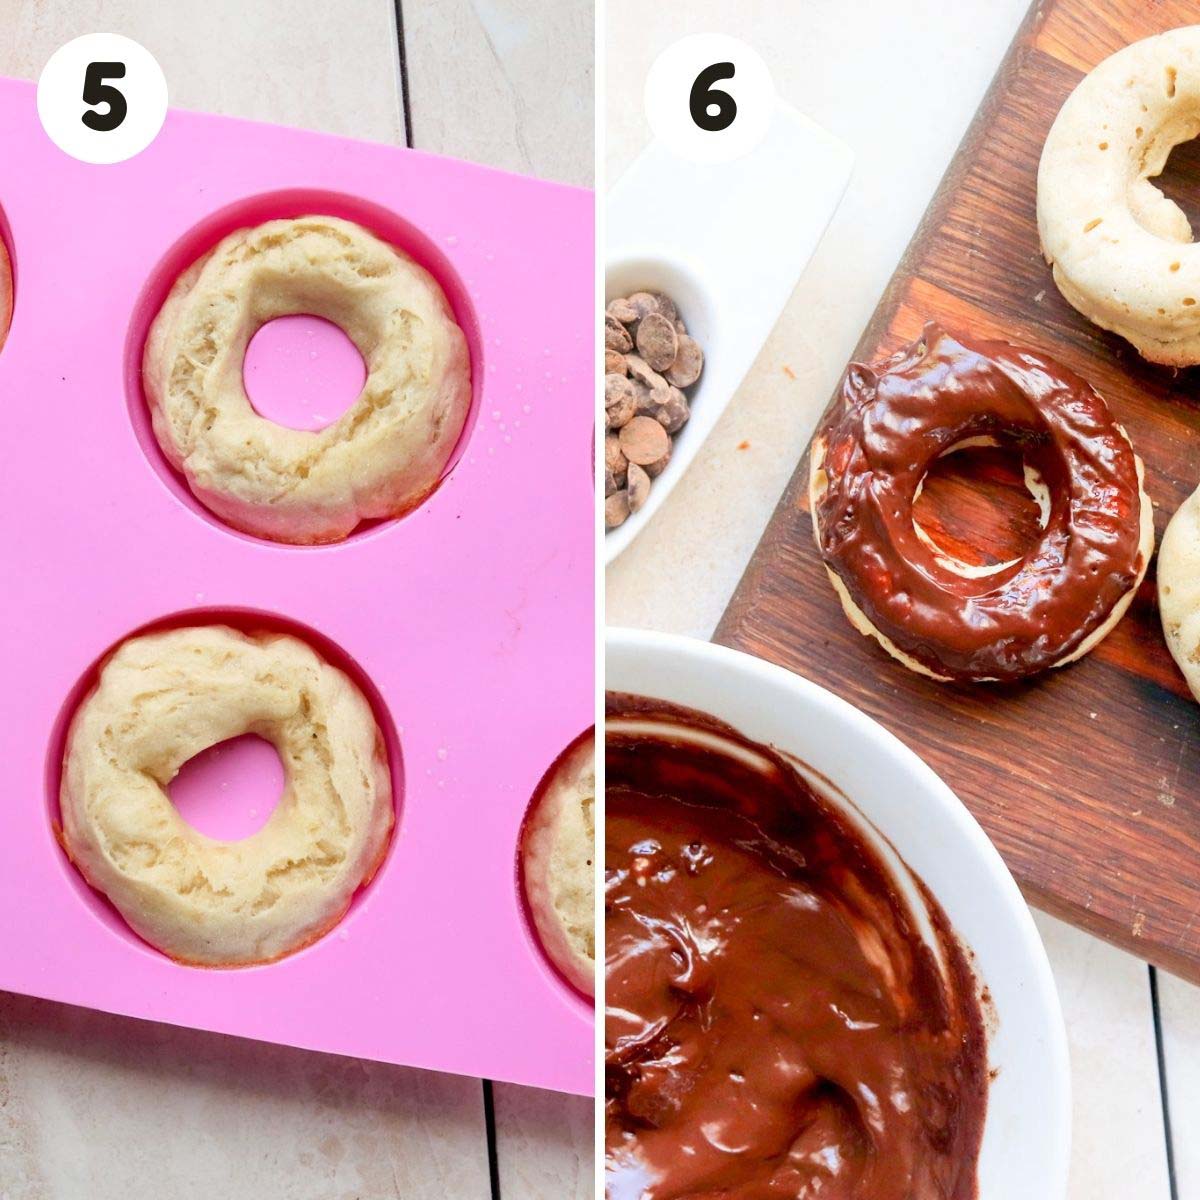 Steps to frost the donuts.